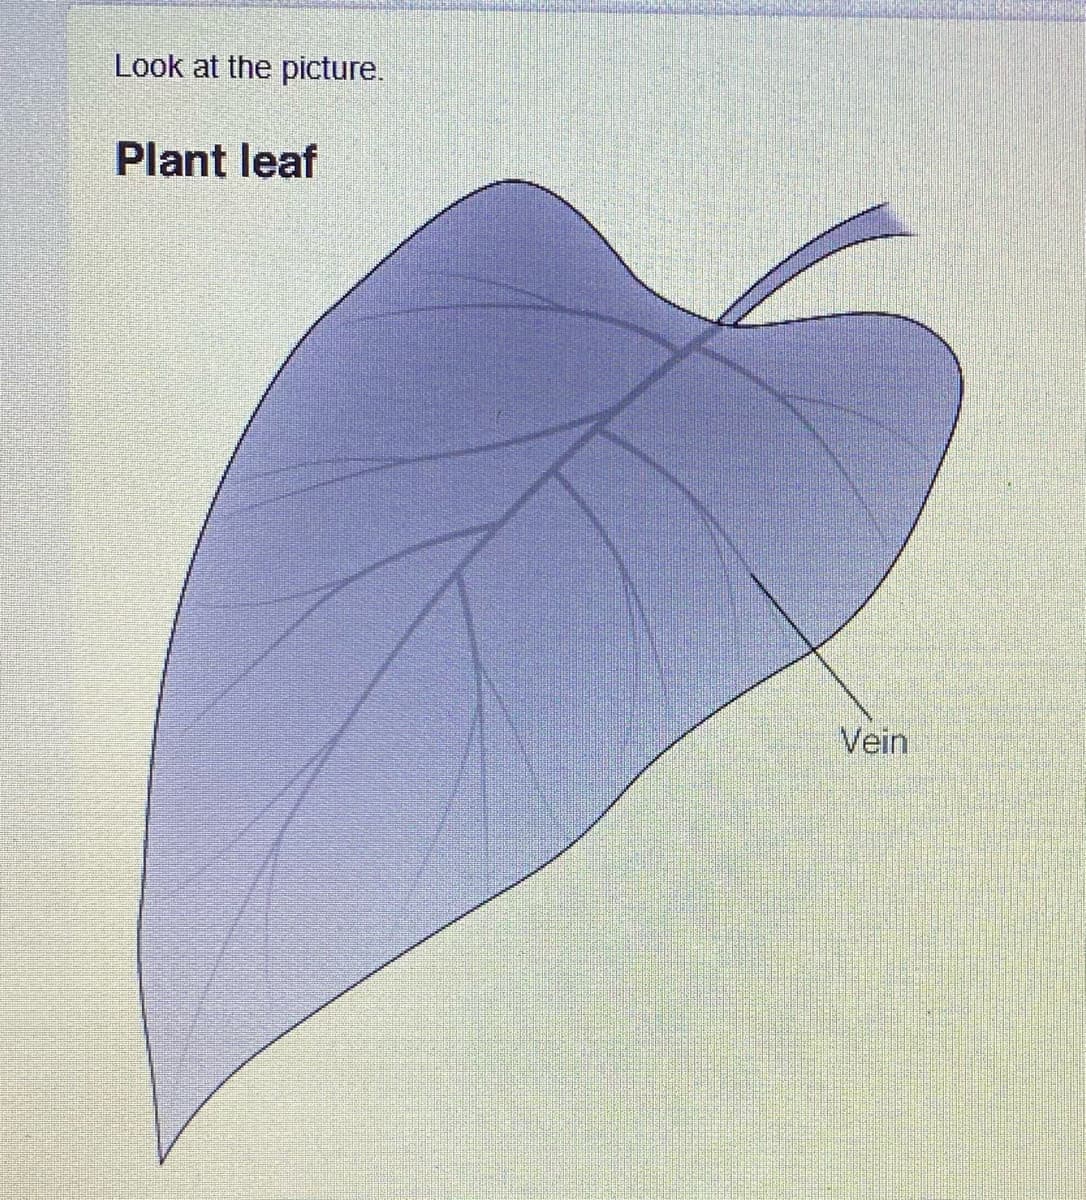 Look at the picture.
Plant leaf
Vein
